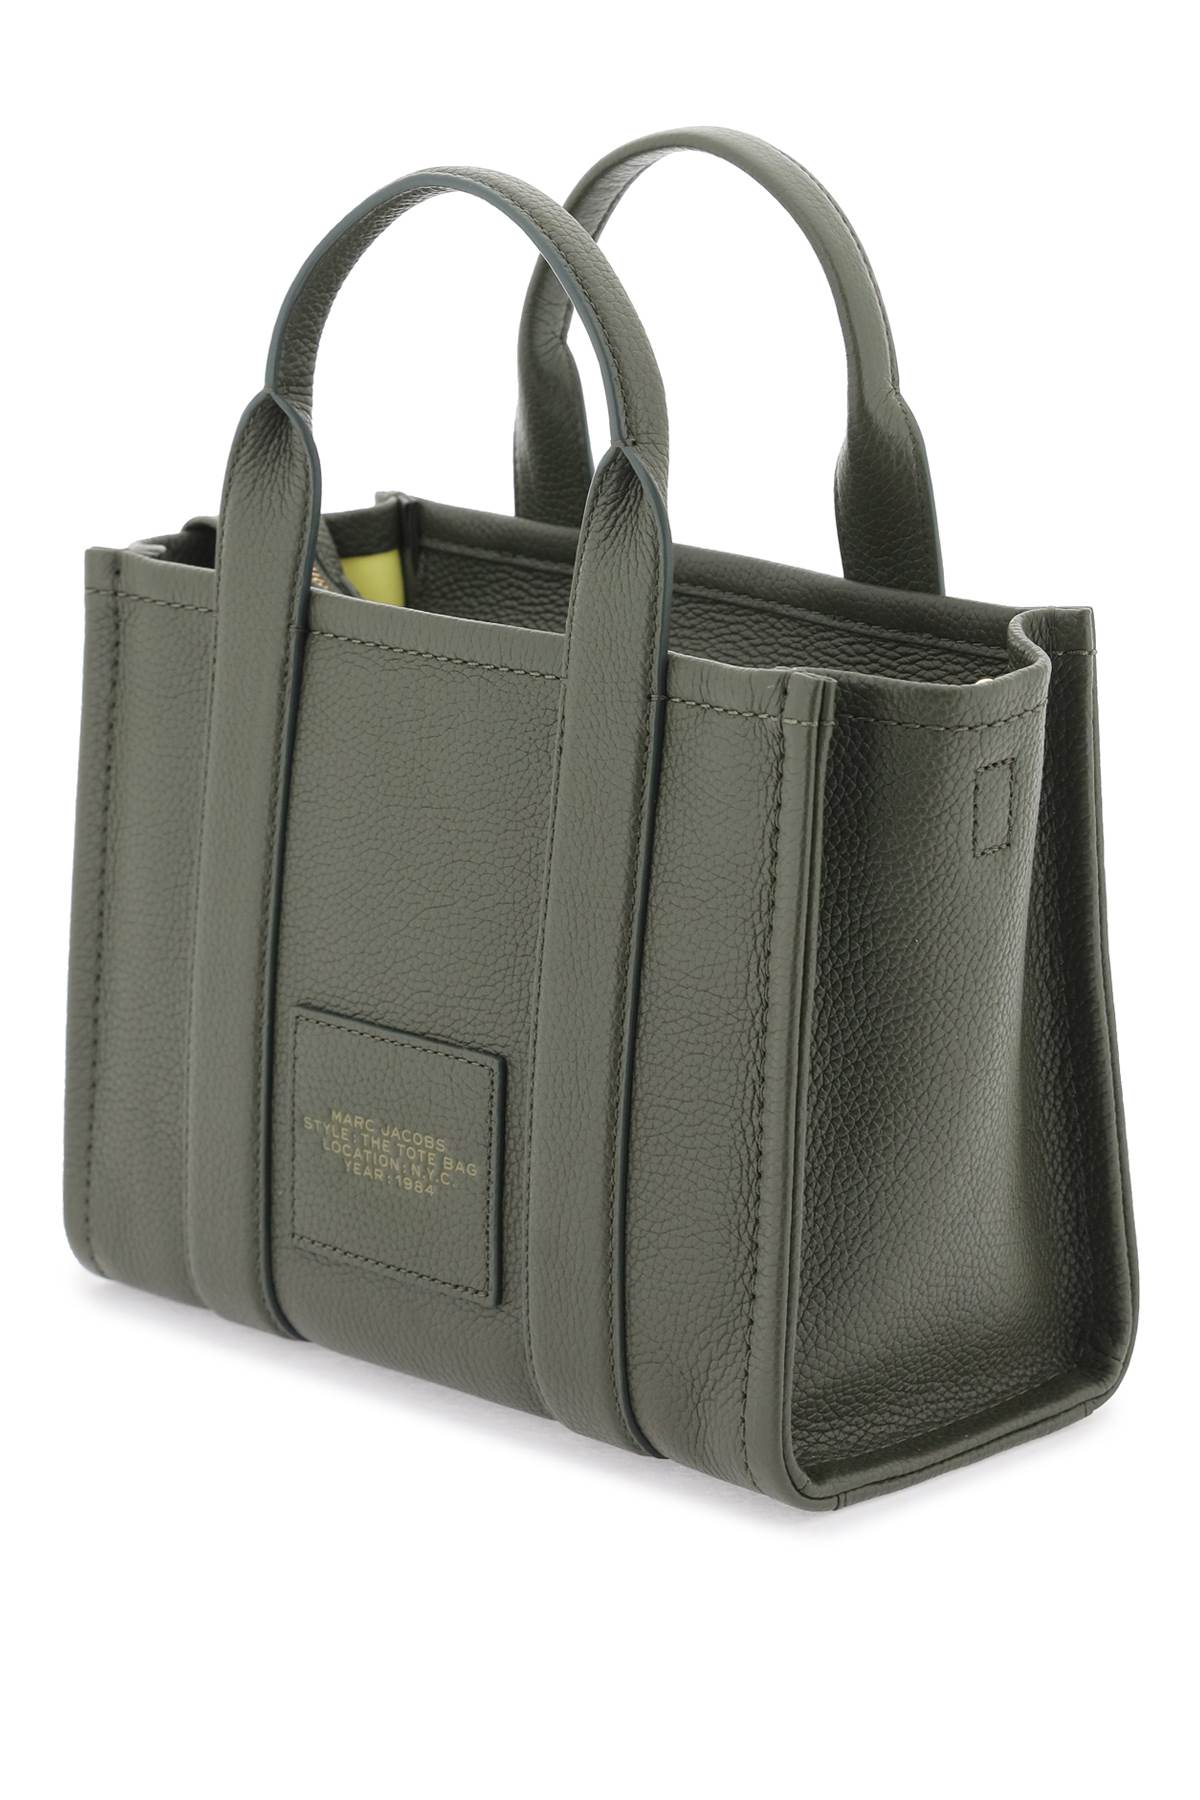 Shop Marc Jacobs The Leather Small Tote Bag In Green